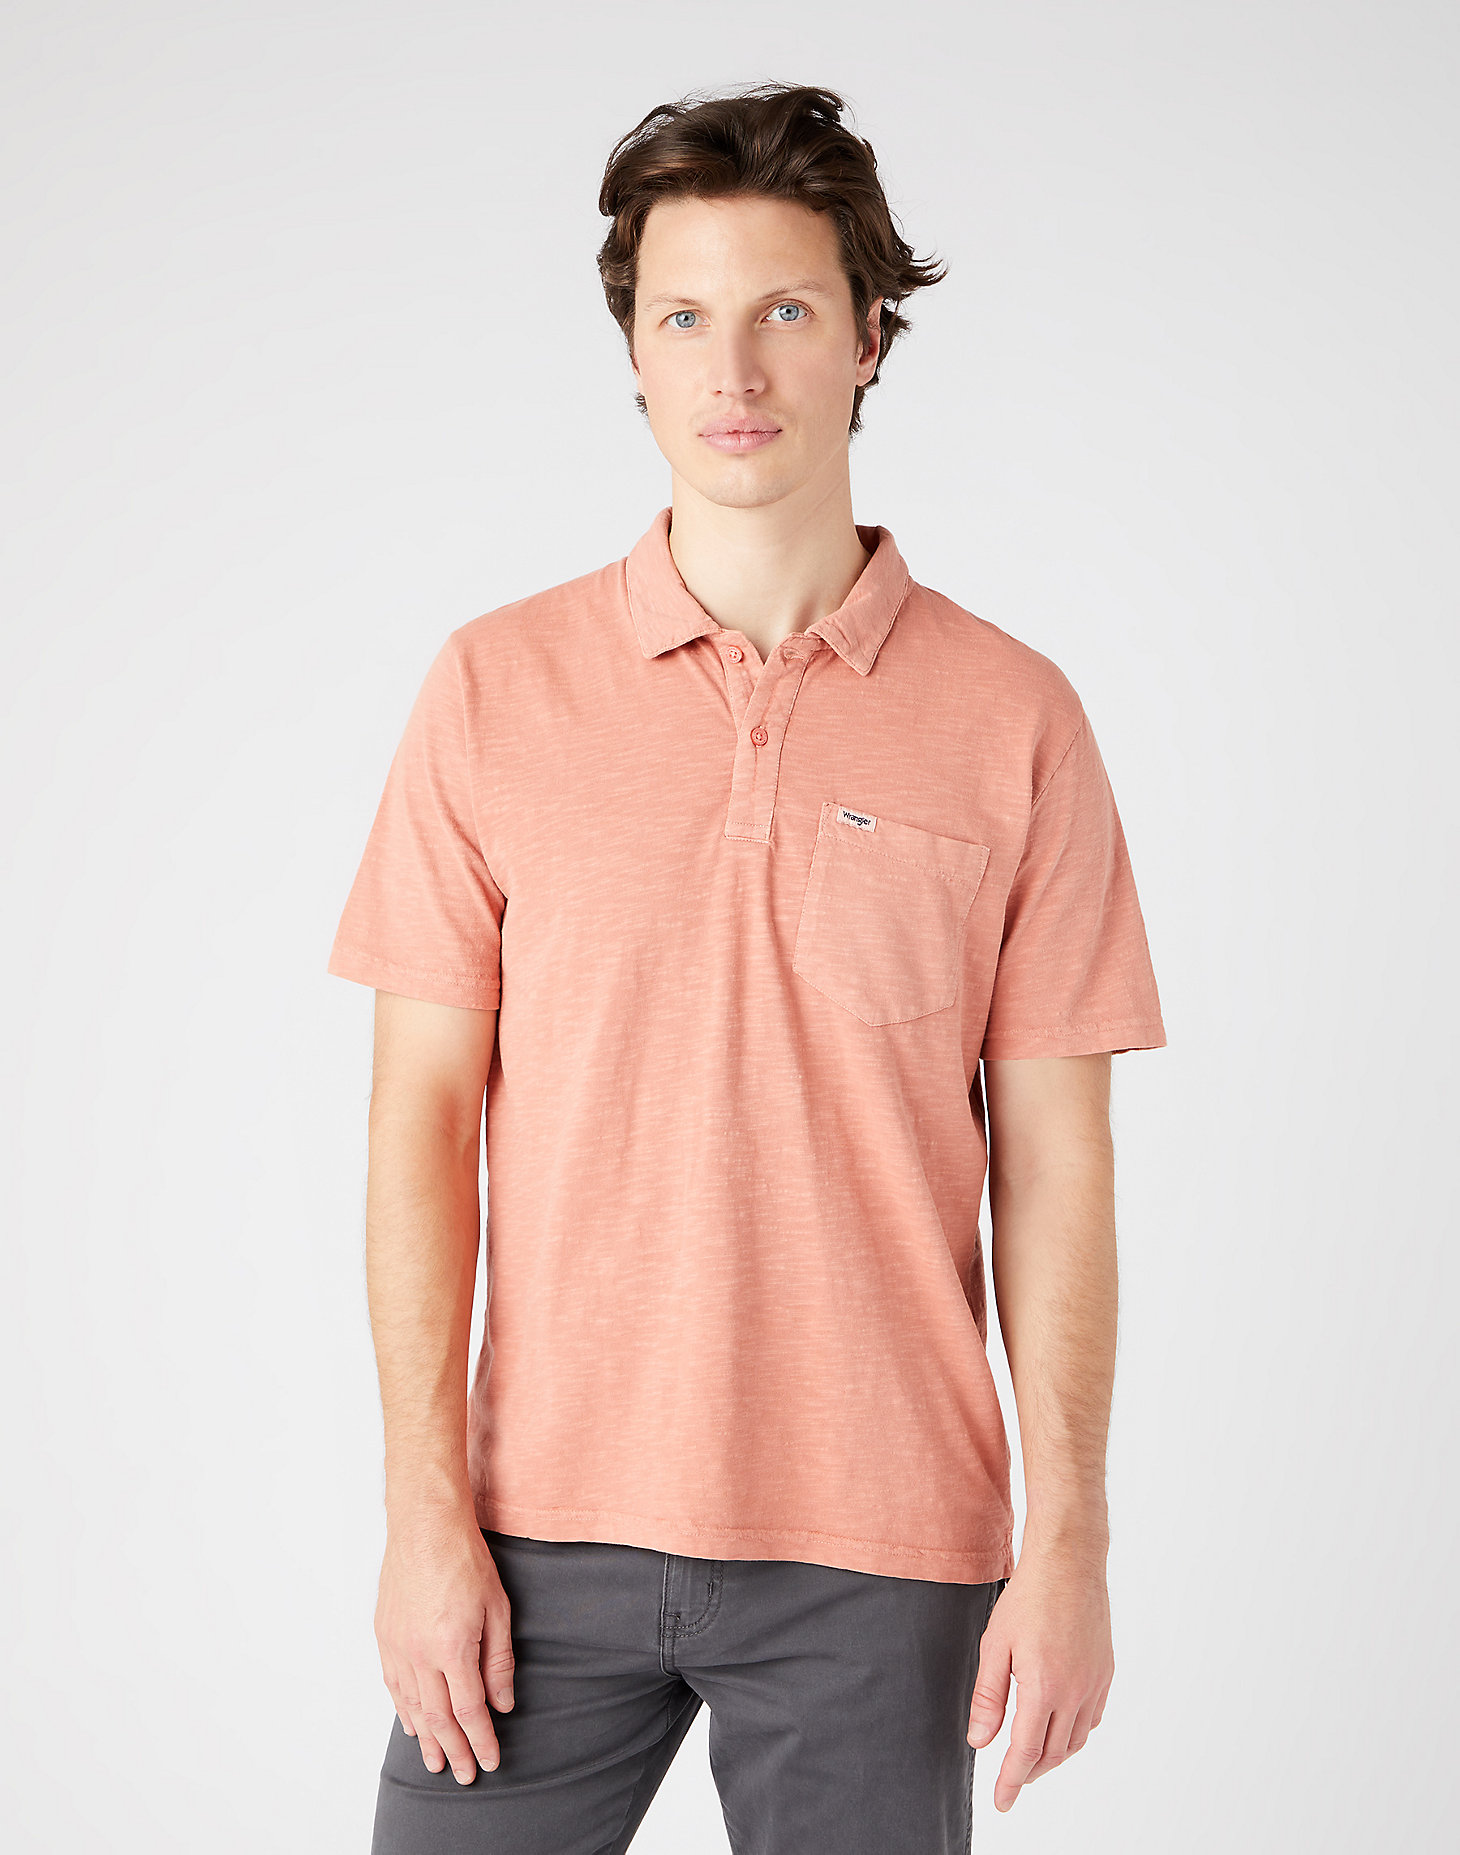 Overdye Polo in Etruscan Red main view